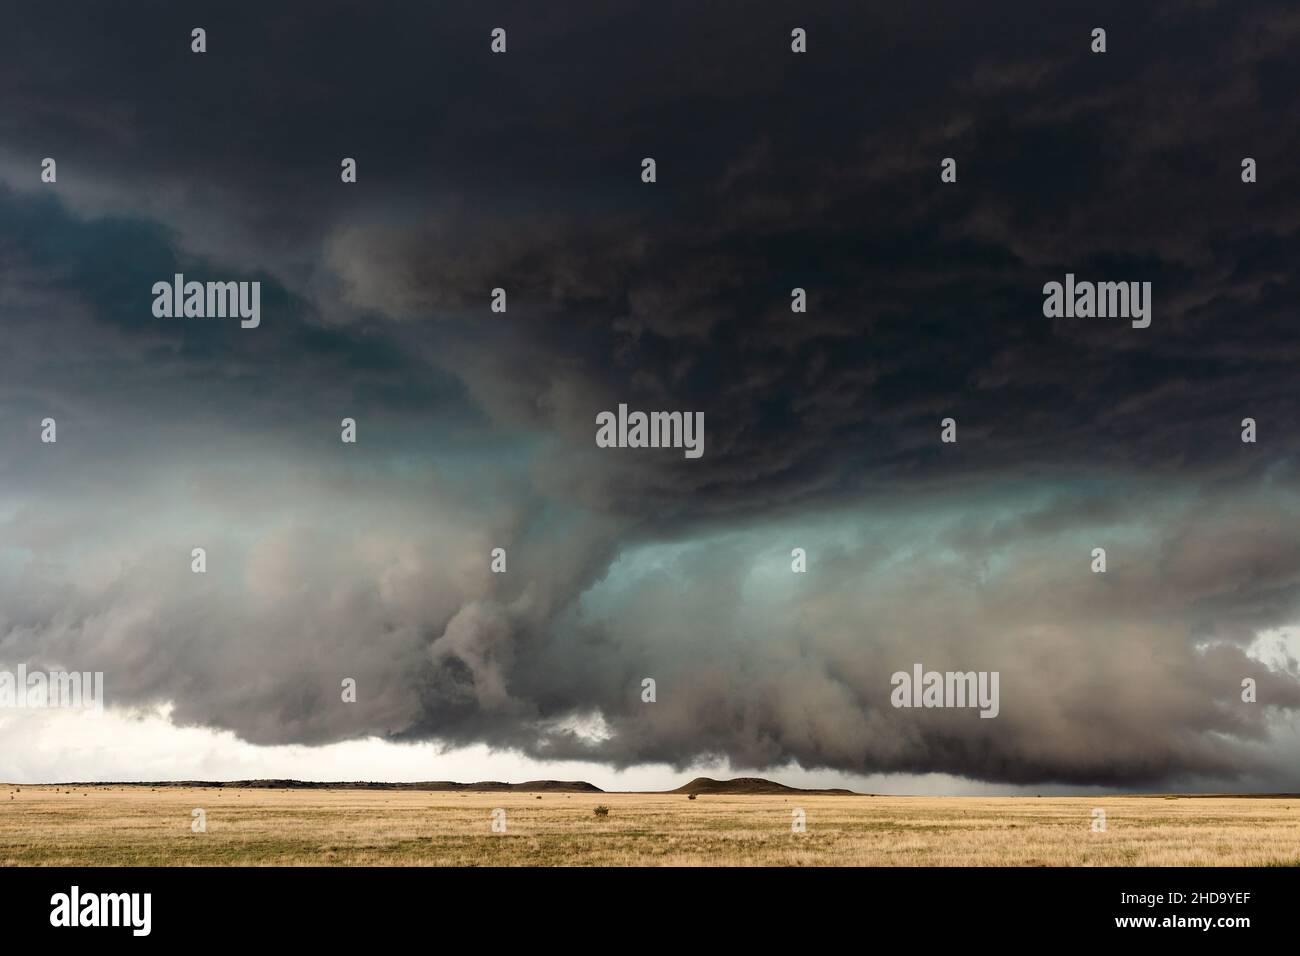 Dramatic sky with ominous storm clouds beneath a supercell thunderstorm near Kim, Colorado Stock Photo